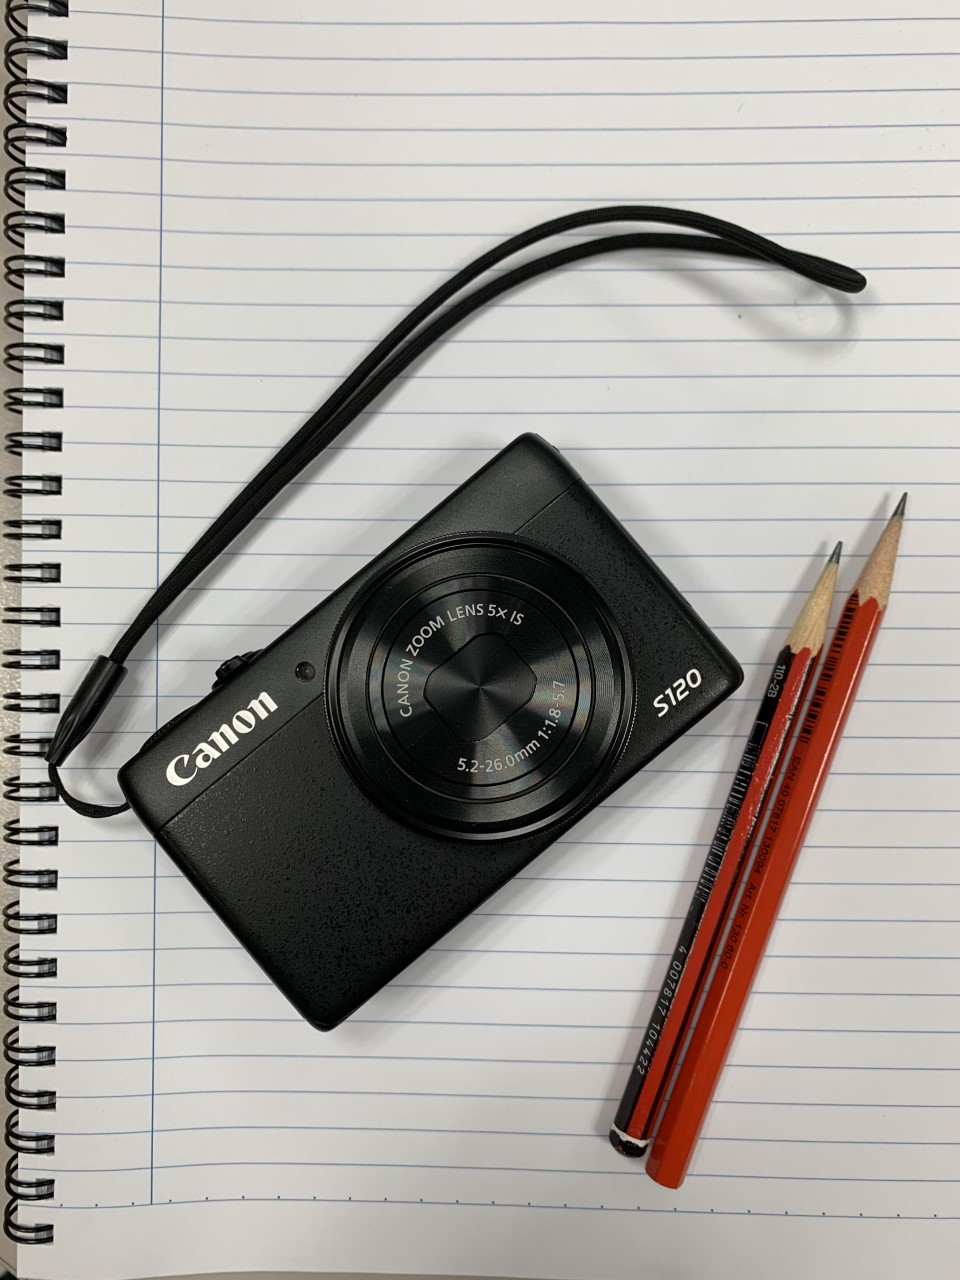 Digital camera sitting on top of notebook with pencil